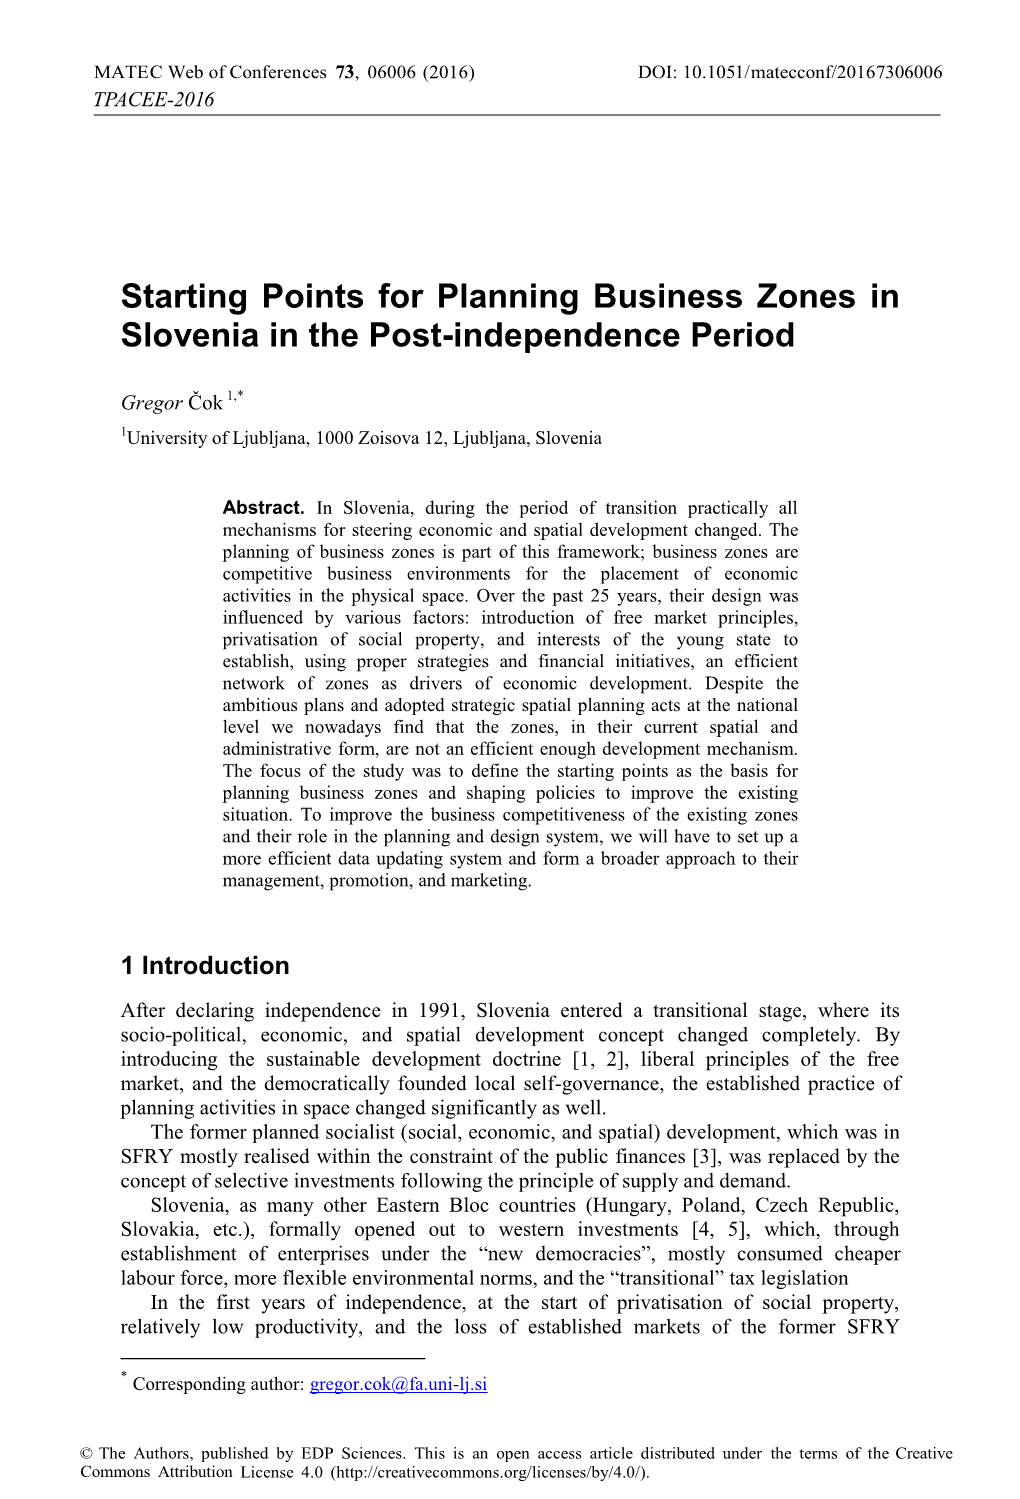 Starting Points for Planning Business Zones in Slovenia in the Post-Independence Period